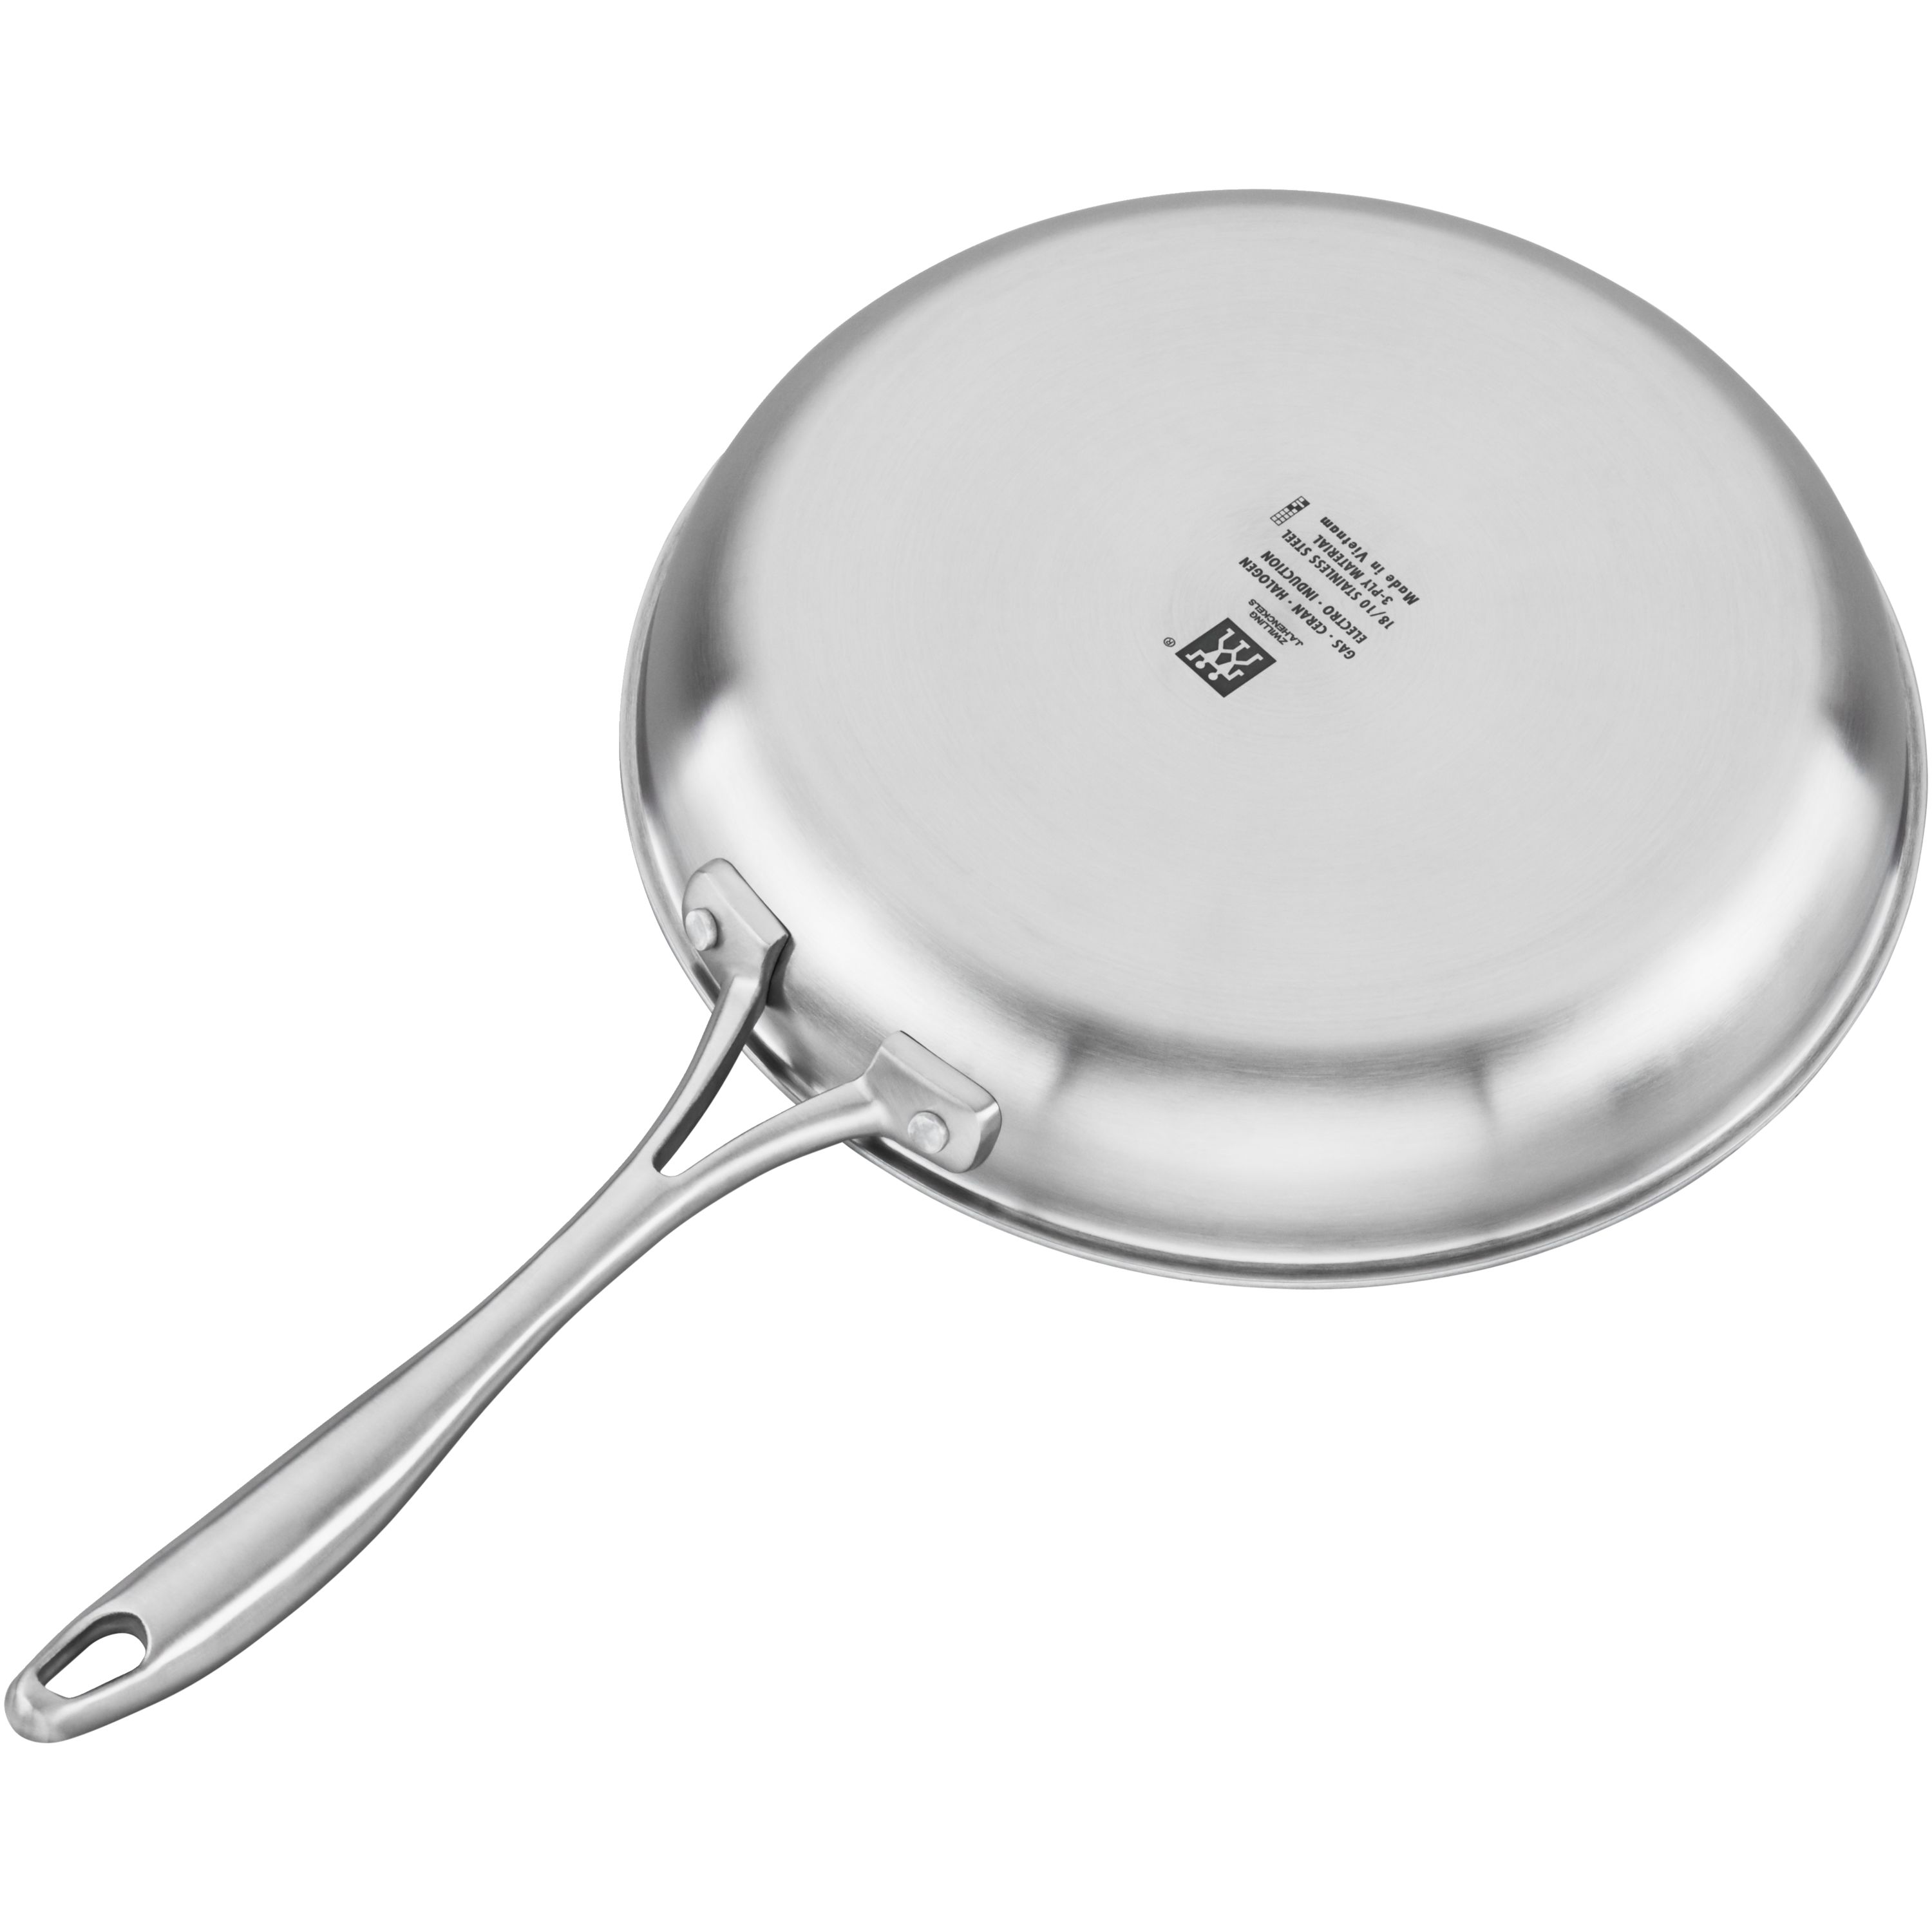 Zwilling Energy Plus 10-inch Stainless Steel Ceramic Nonstick Fry Pan With  Lid : Target